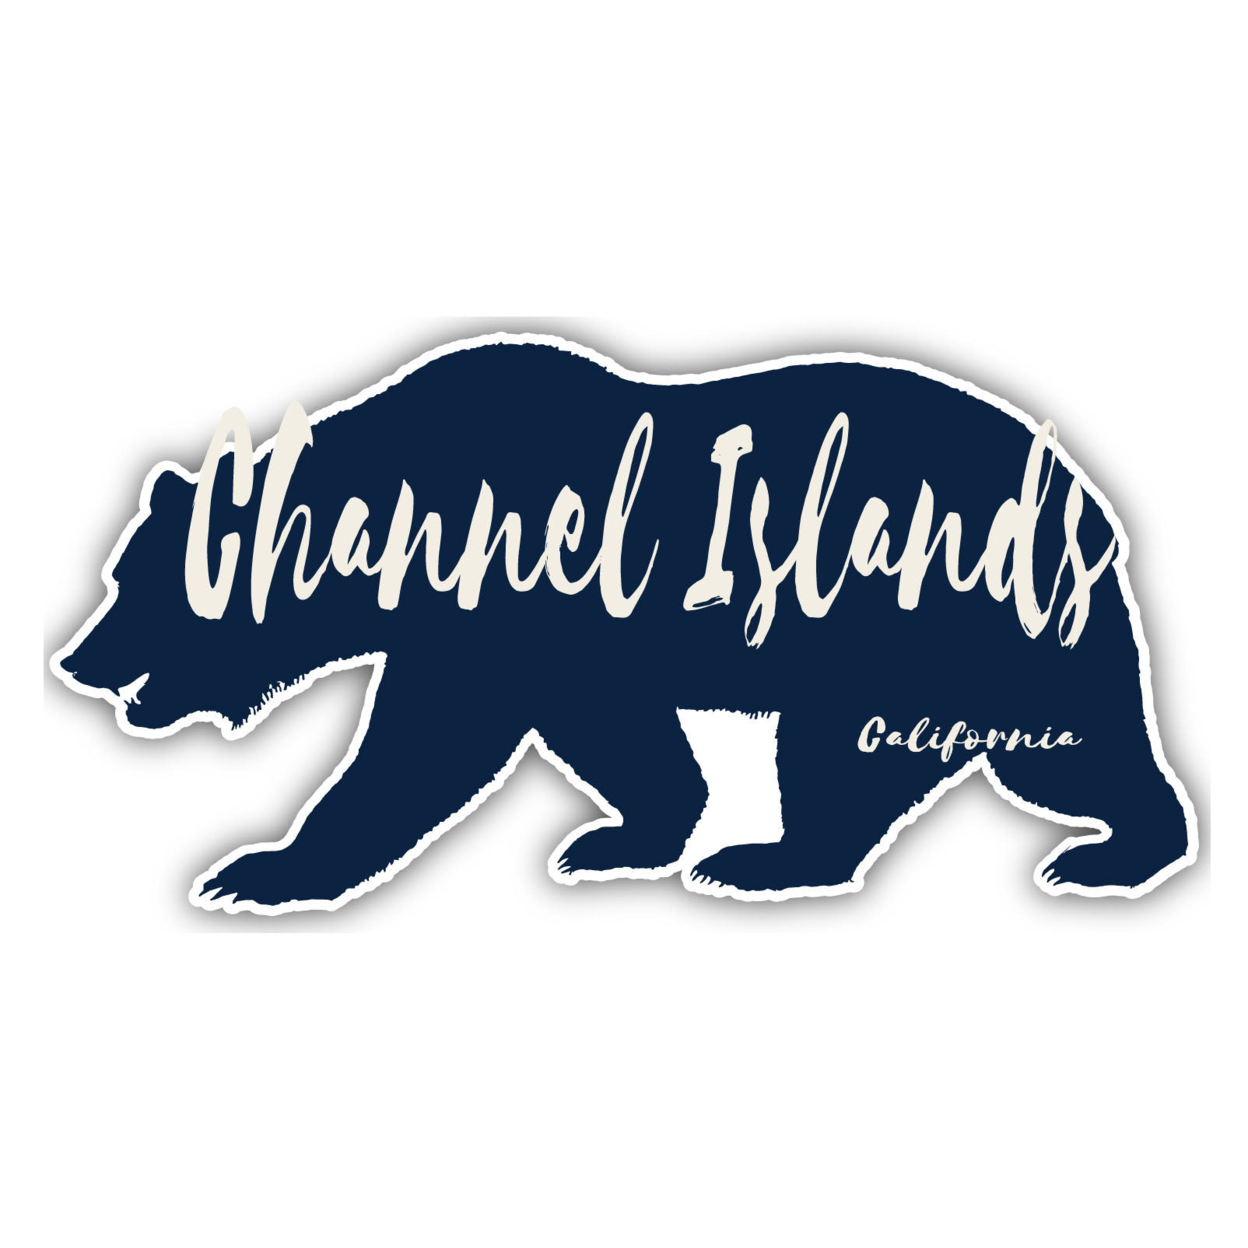 Channel Islands California Souvenir Decorative Stickers (Choose Theme And Size) - 4-Pack, 2-Inch, Bear